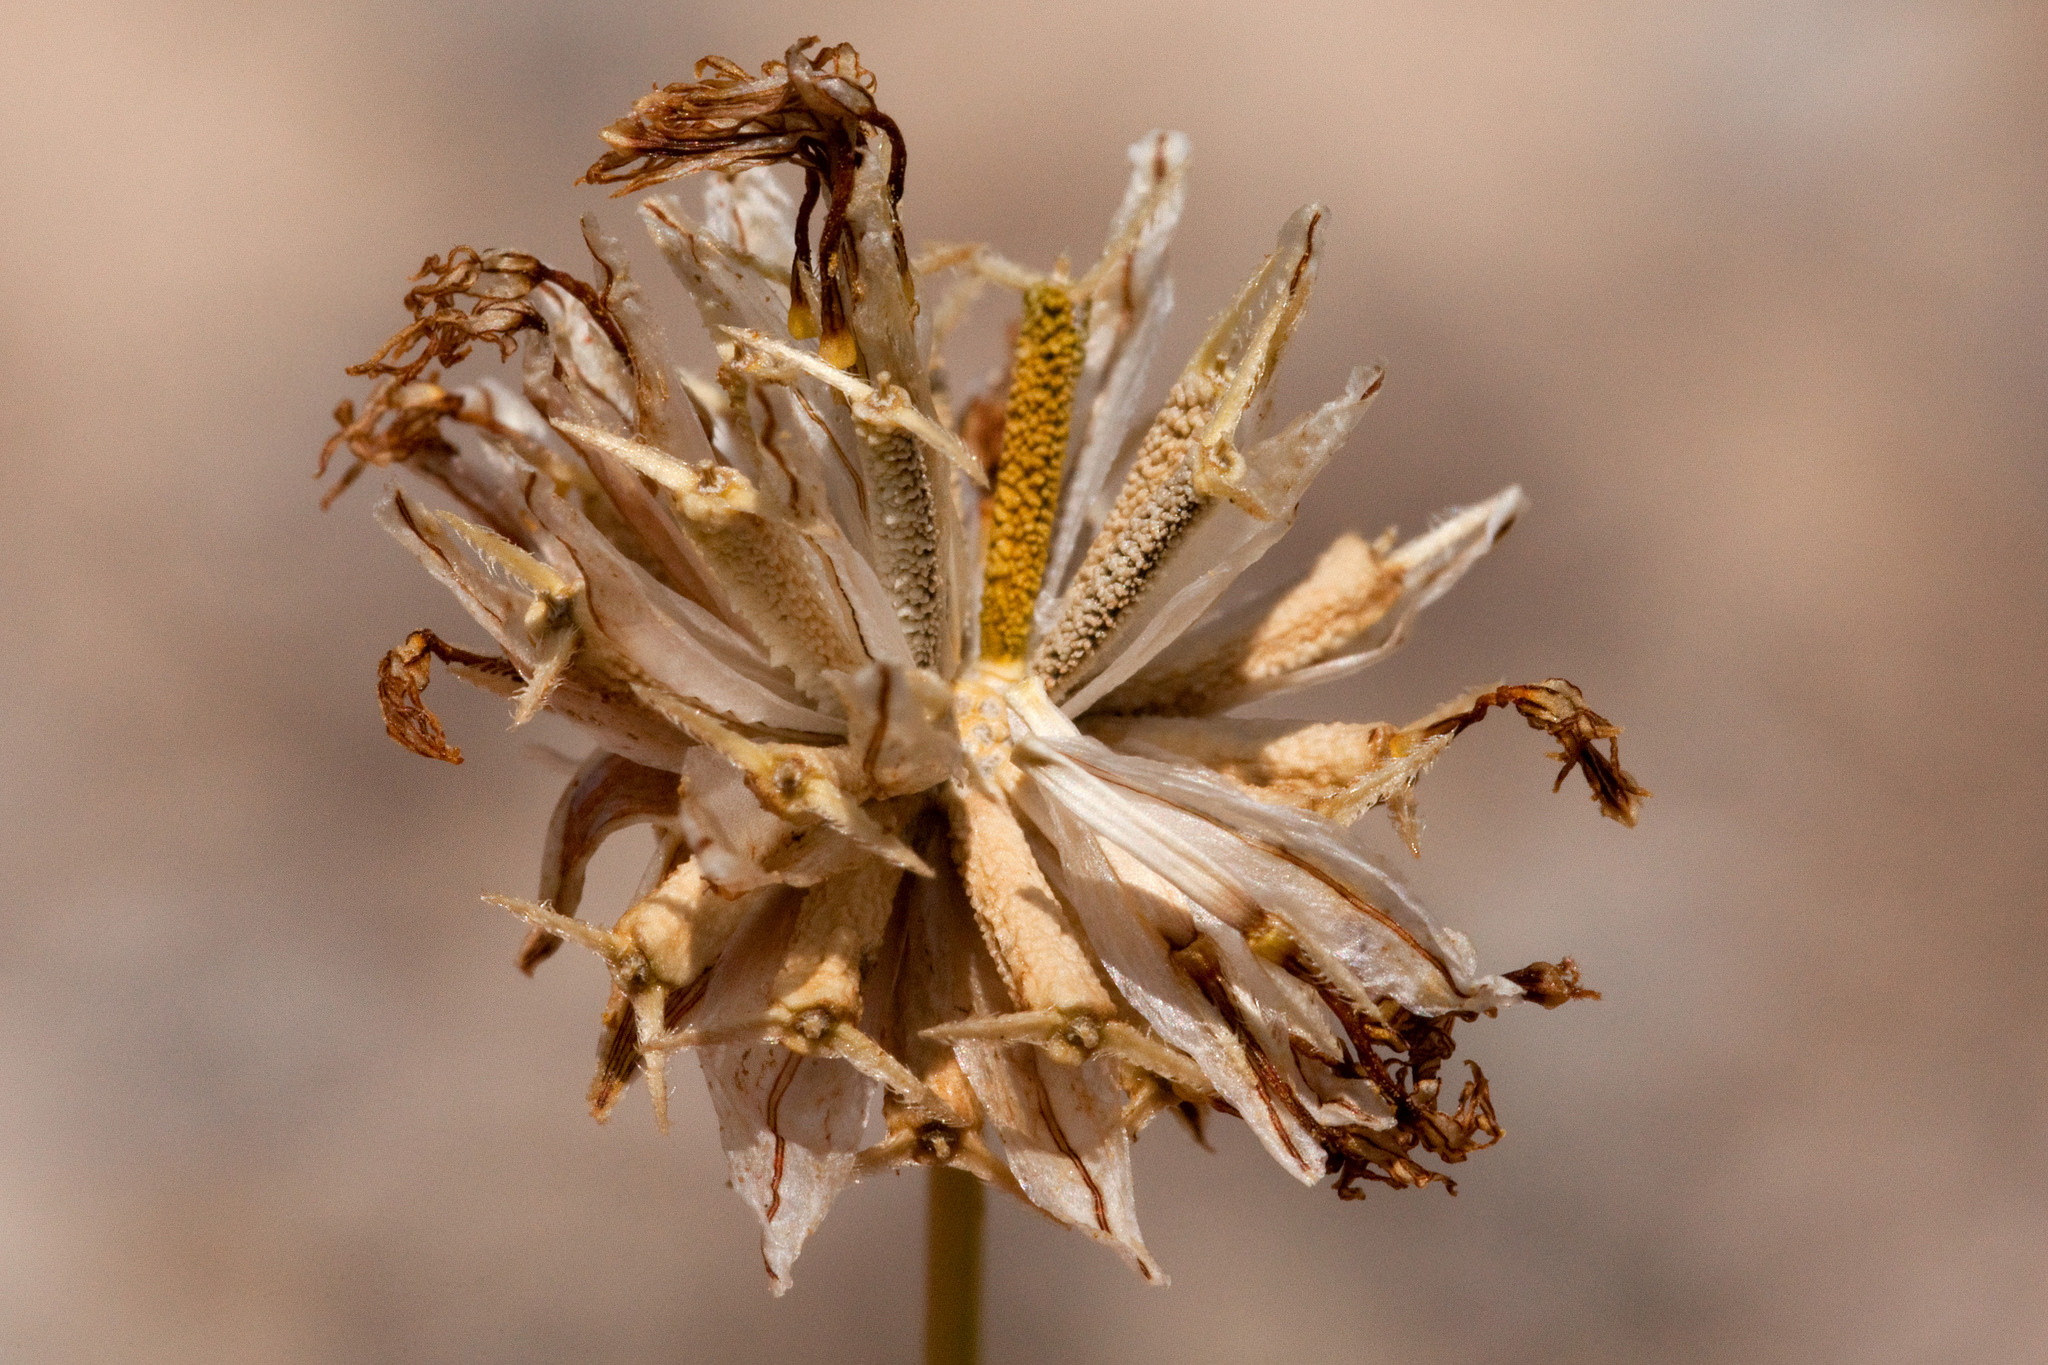 Dry flower showing the many parts that constitute the flower (ray flowers and disk flowers)